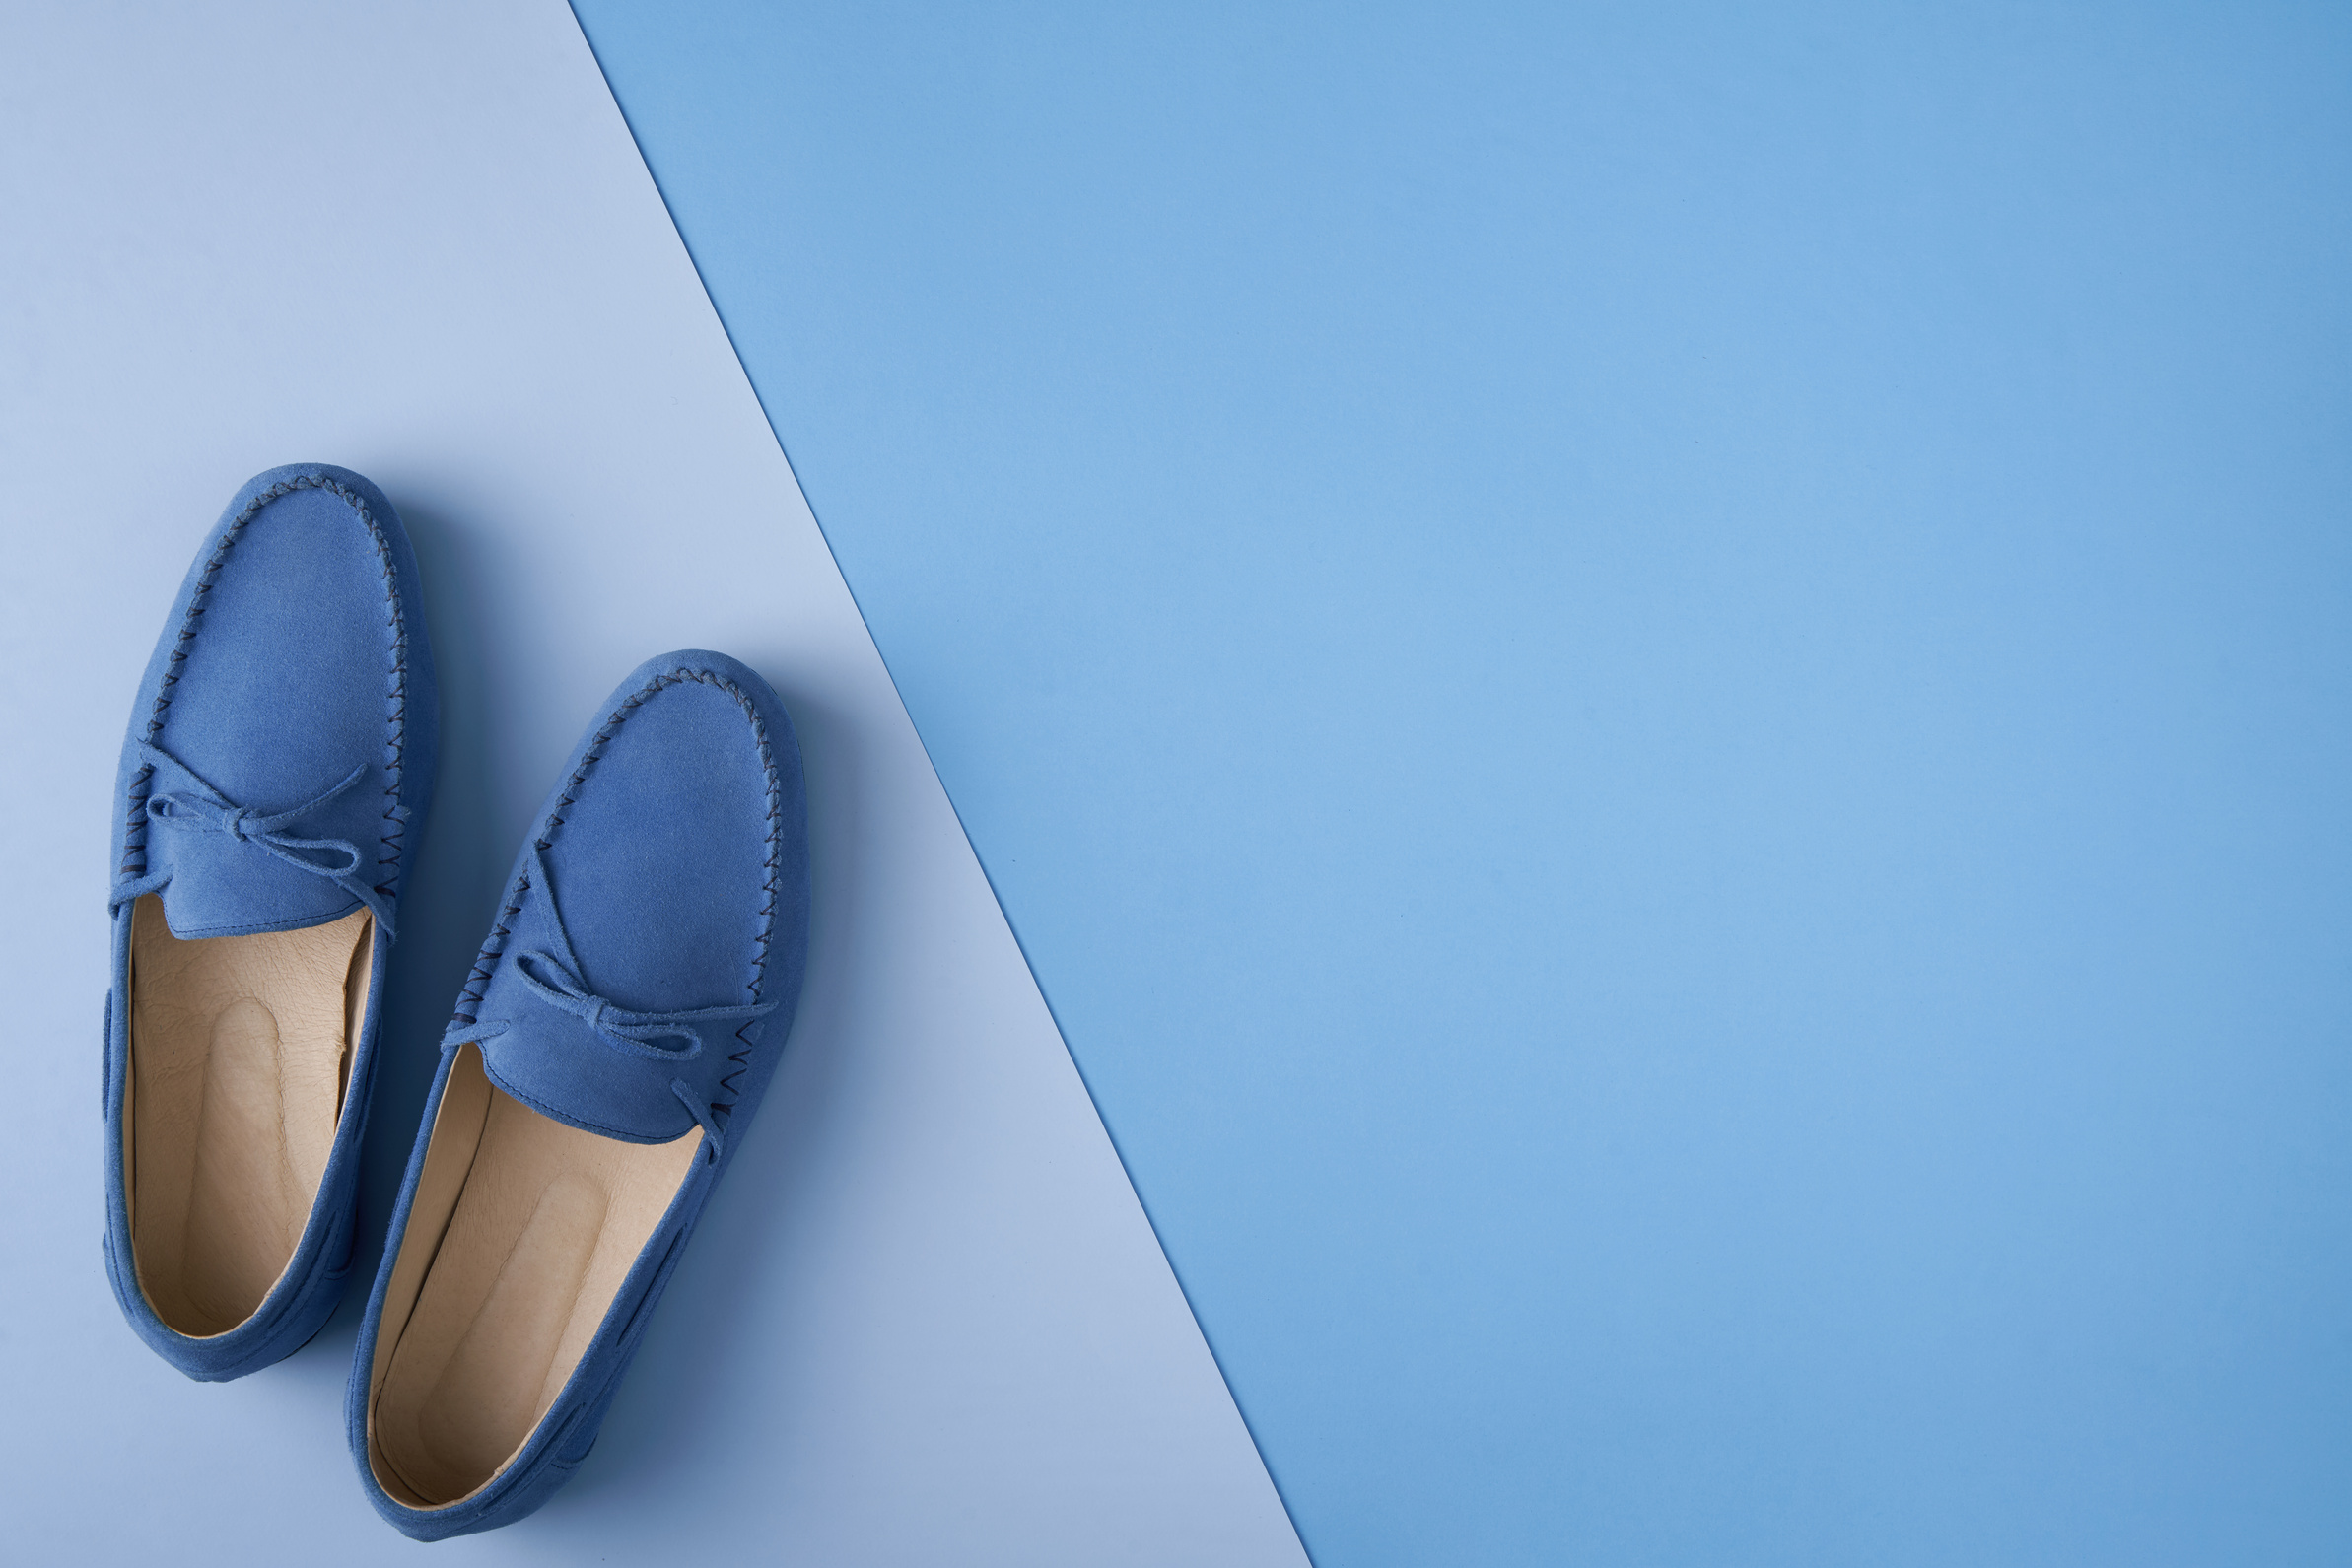 Blue suede man's moccasin shoes over blue background